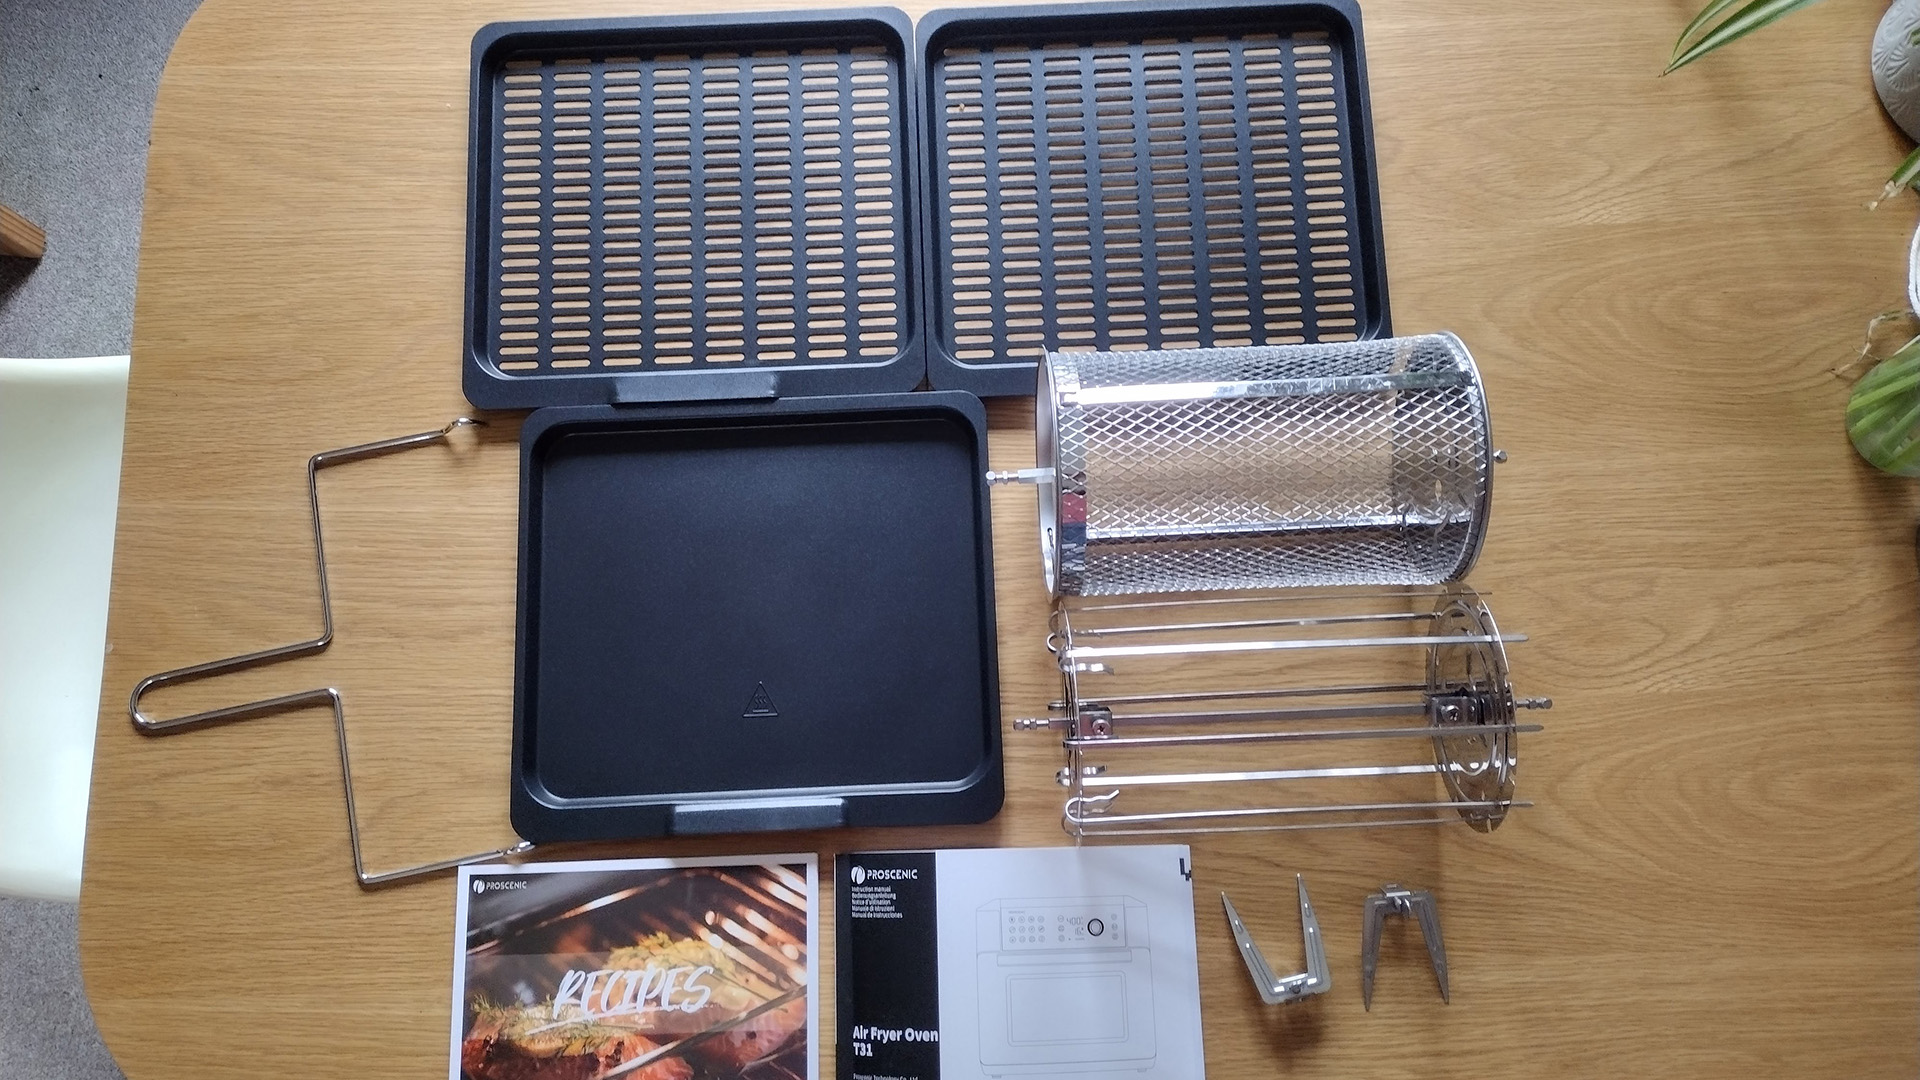 Proscenic air fryer parts laid out on a table.